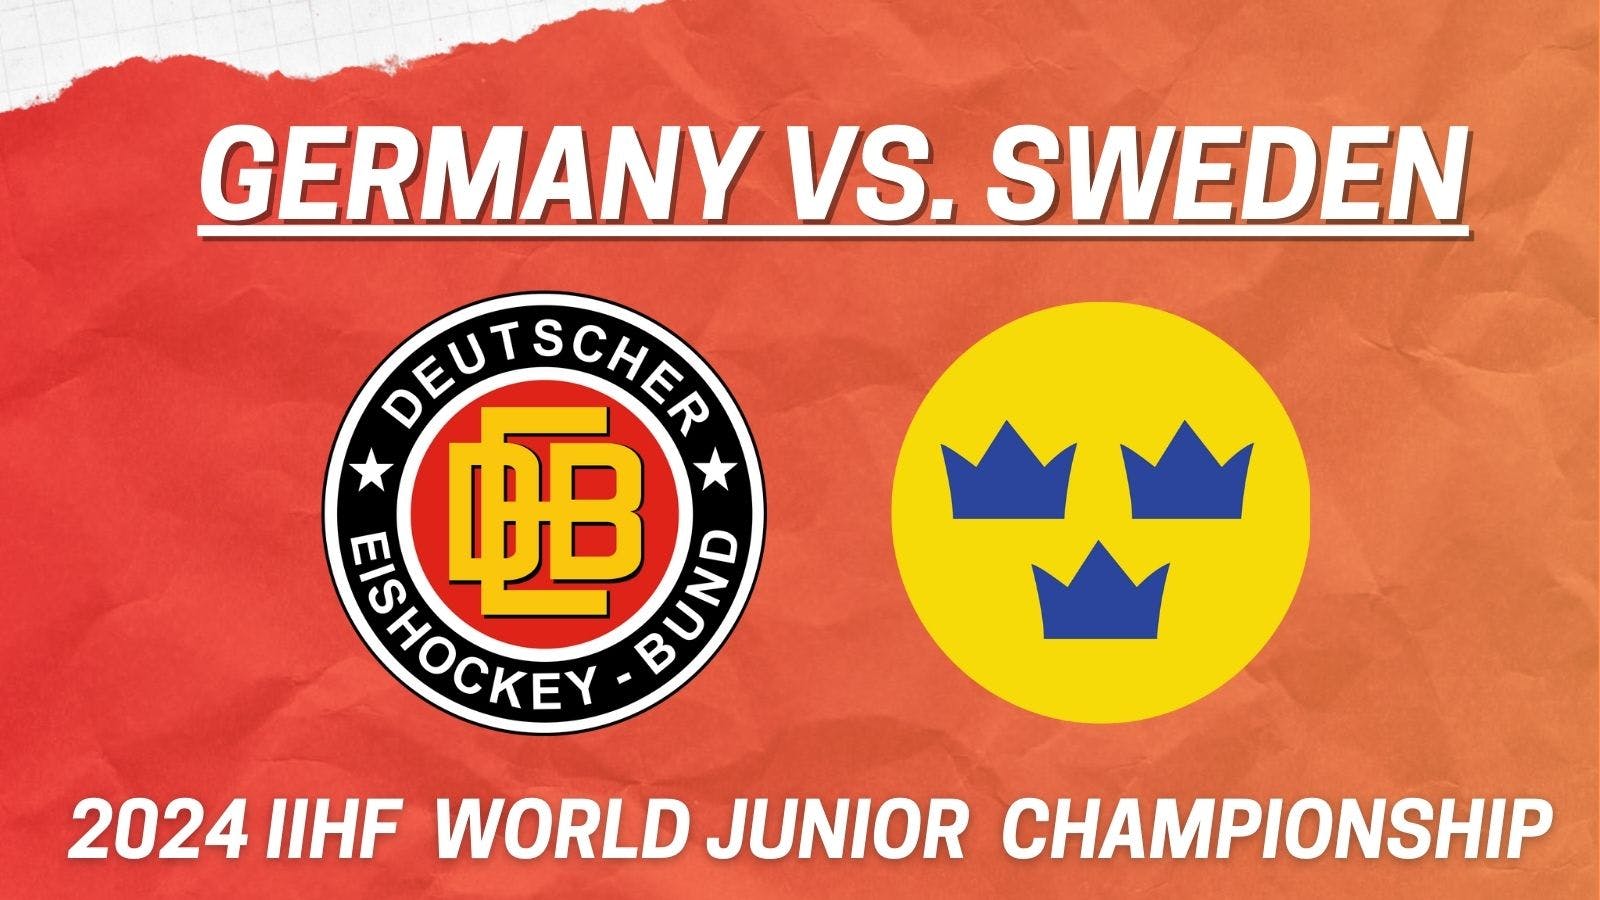 Top standouts from Germany vs. Sweden at 2024 World Junior Championship